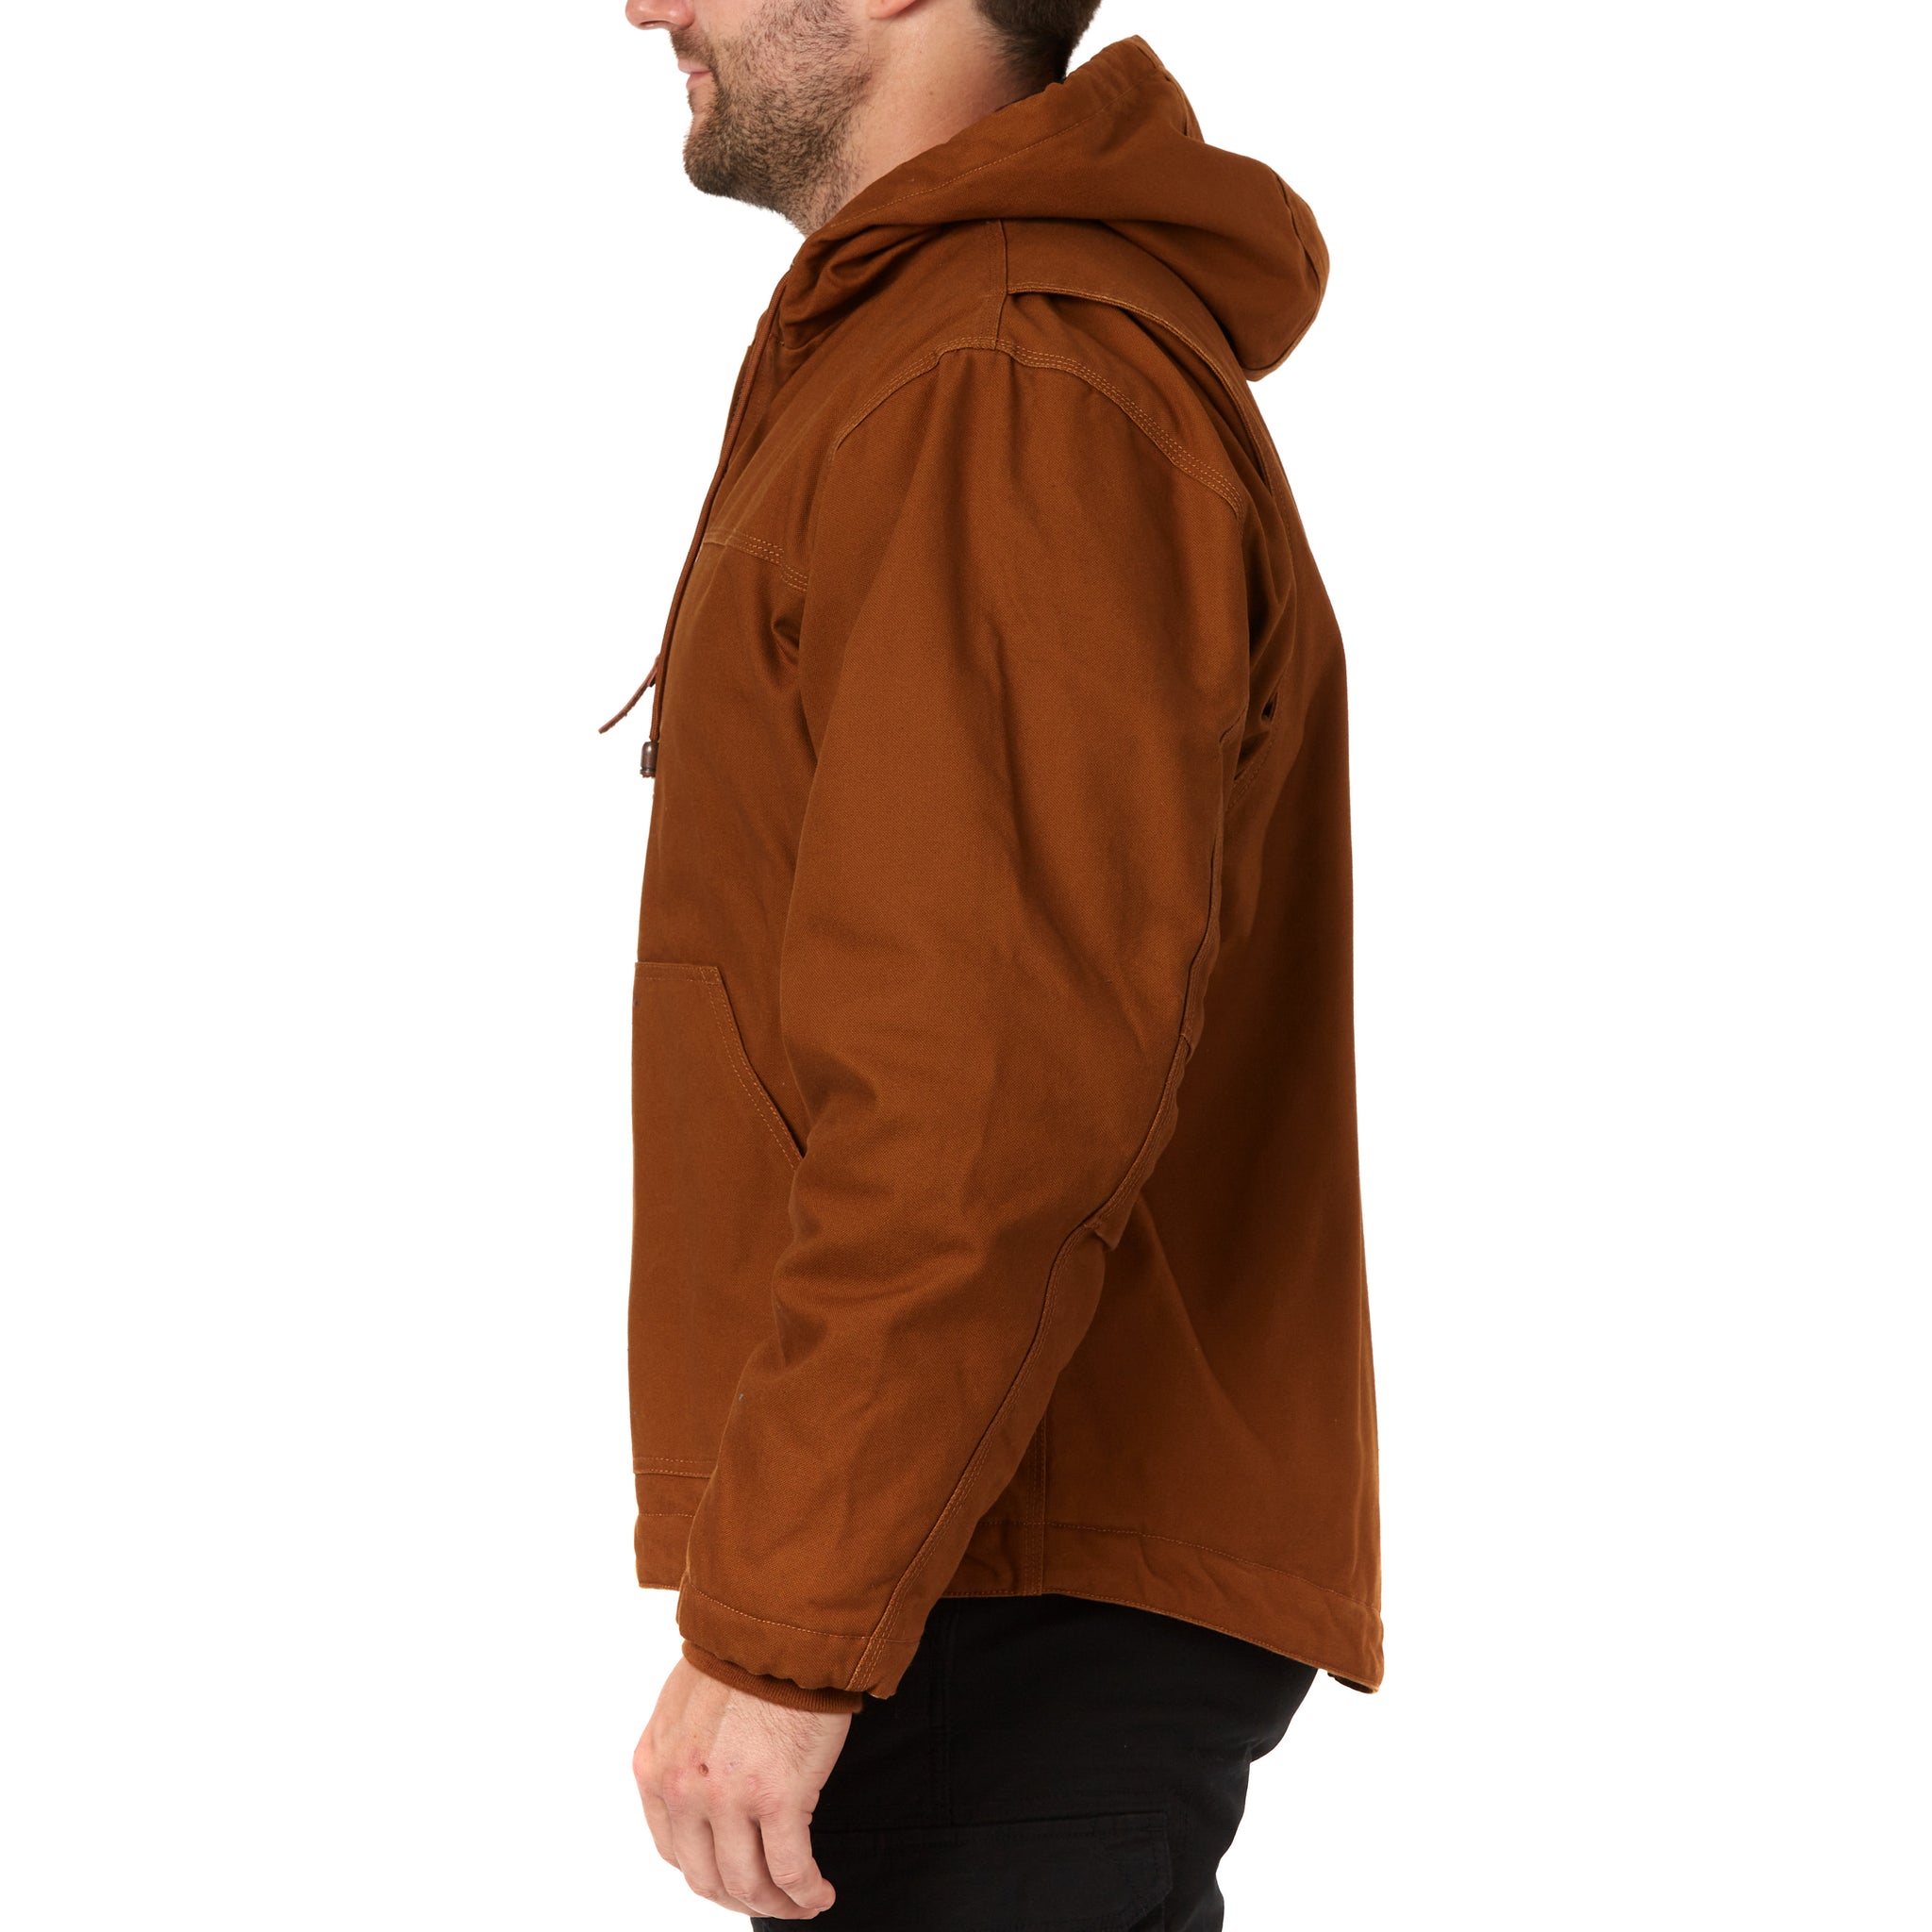 FLANNEL-LINED COTTON DUCK CANVAS HOODED WORK JACKET